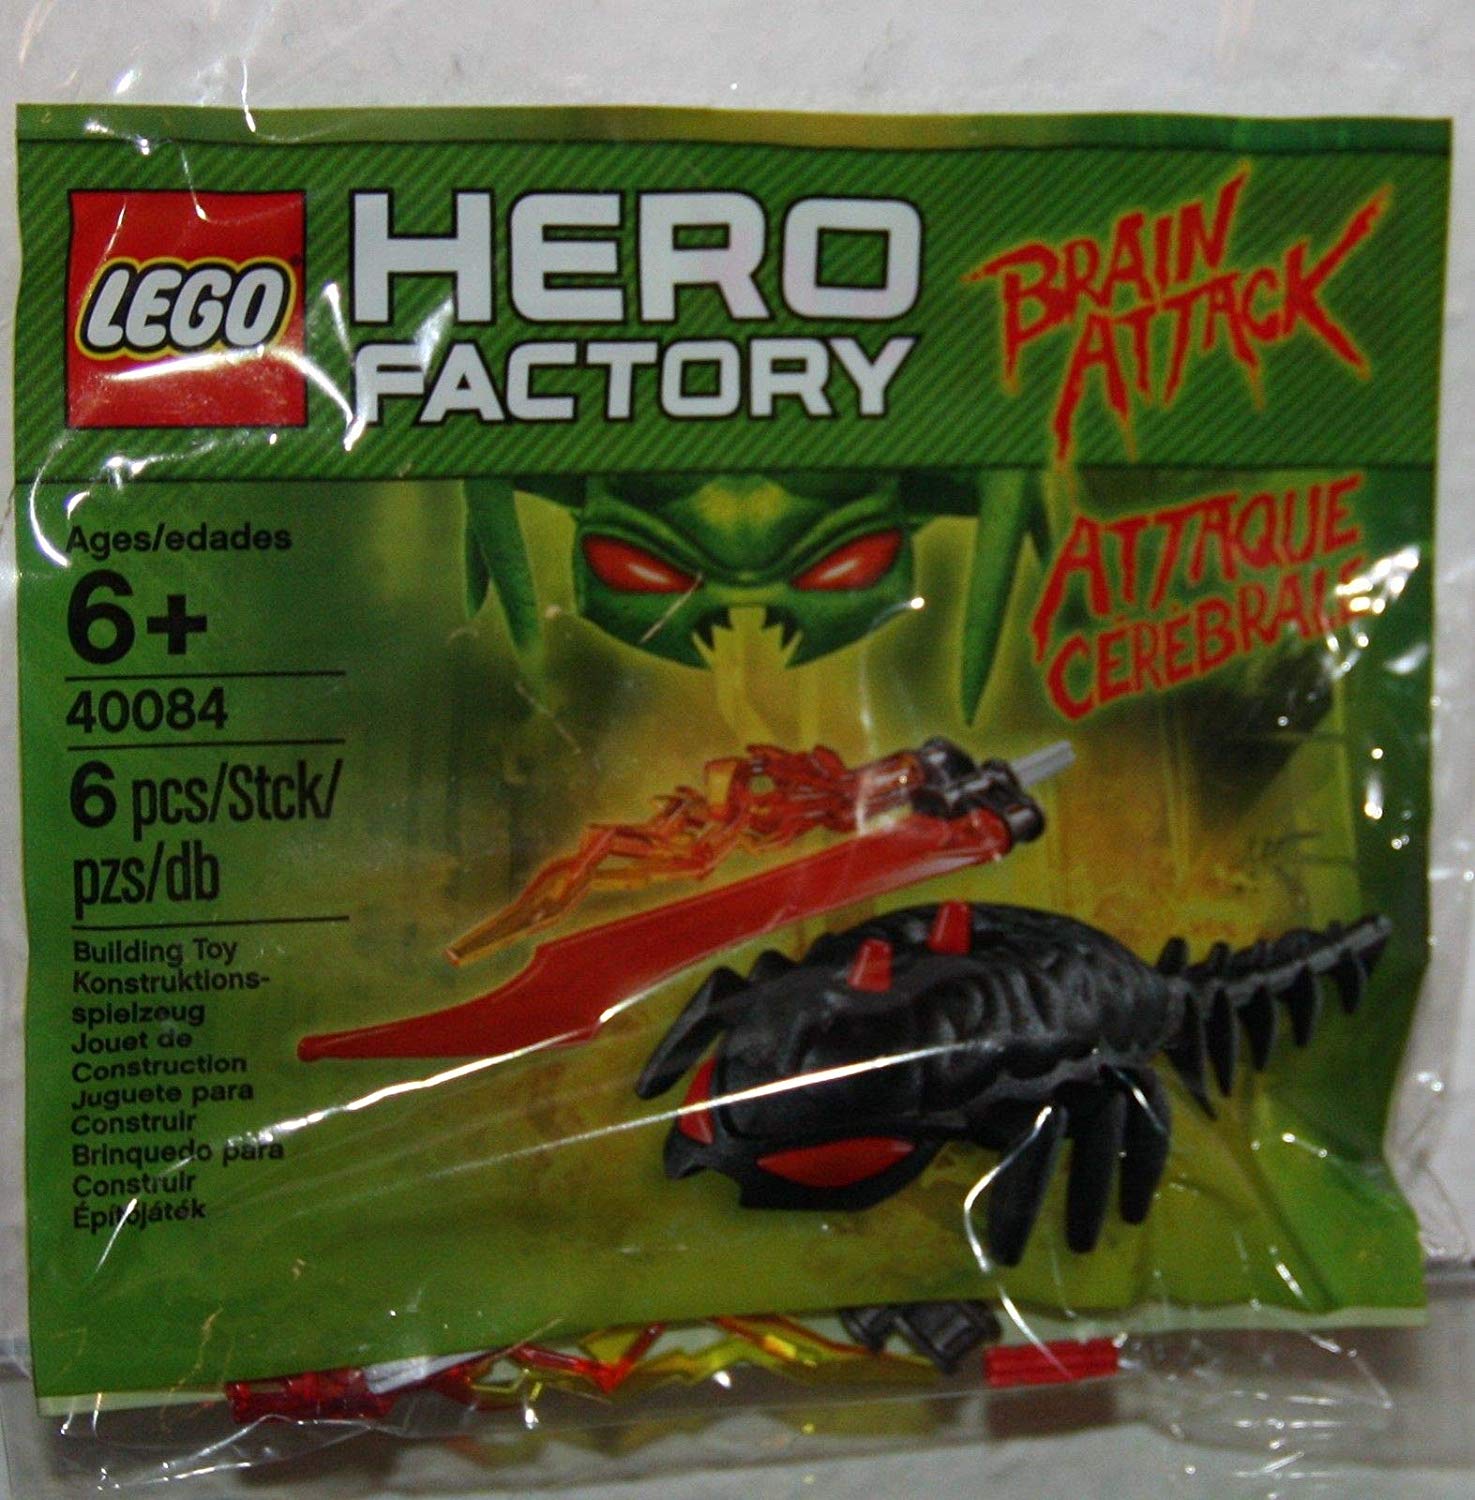 LEGO Hero Factory Set #40084 Brain Attack - Accessory Pack [Bagged] by LEGO